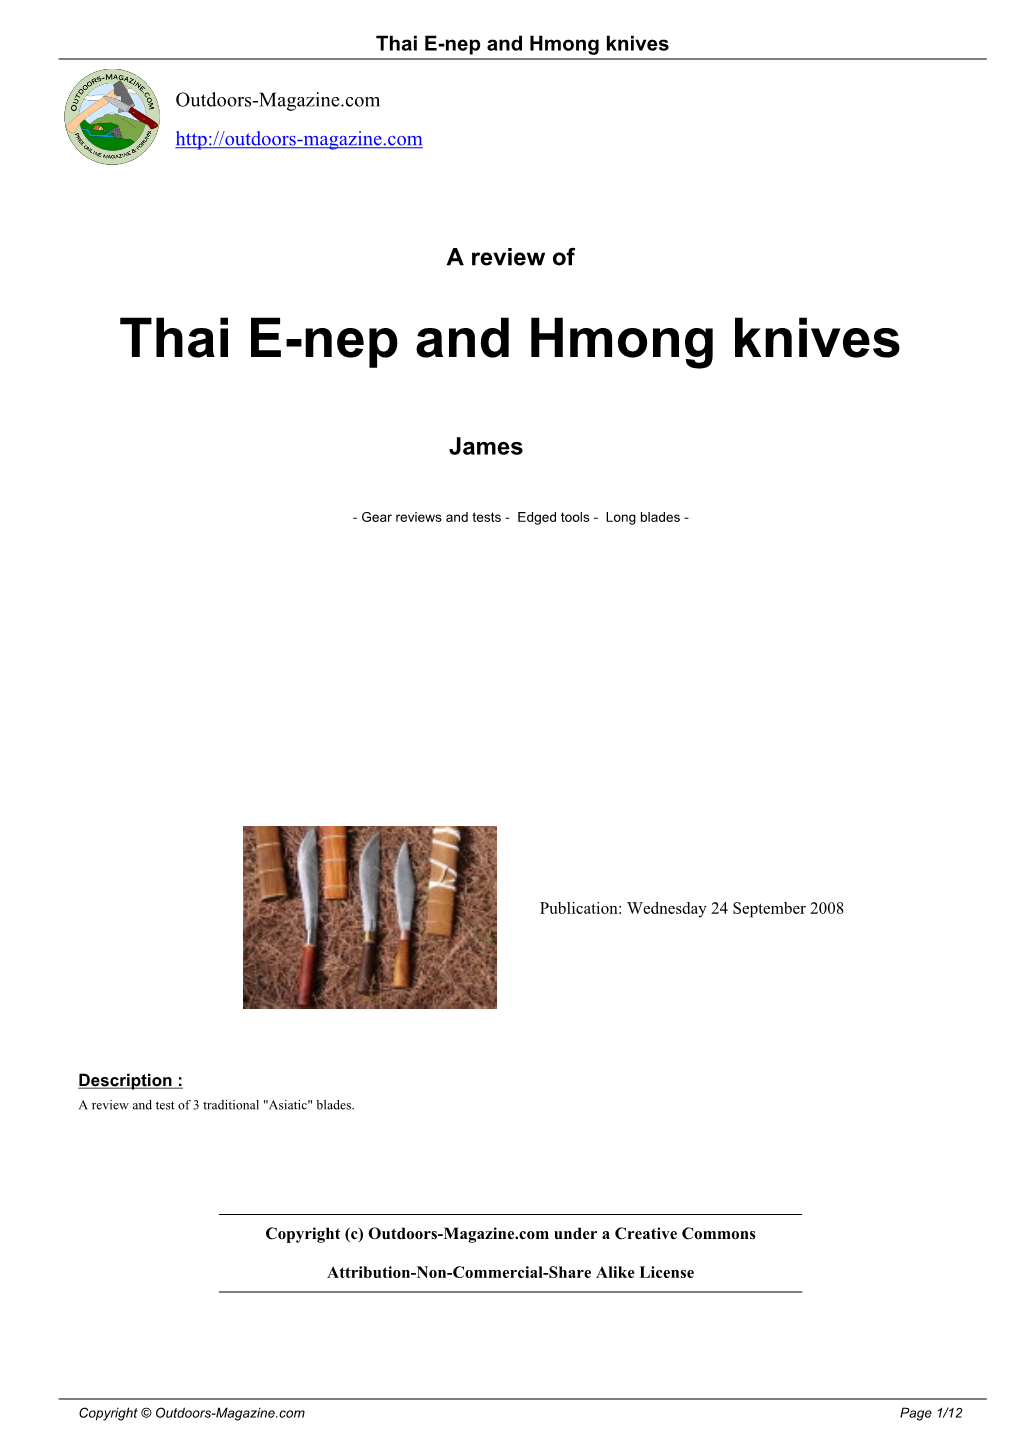 Thai E-Nep and Hmong Knives